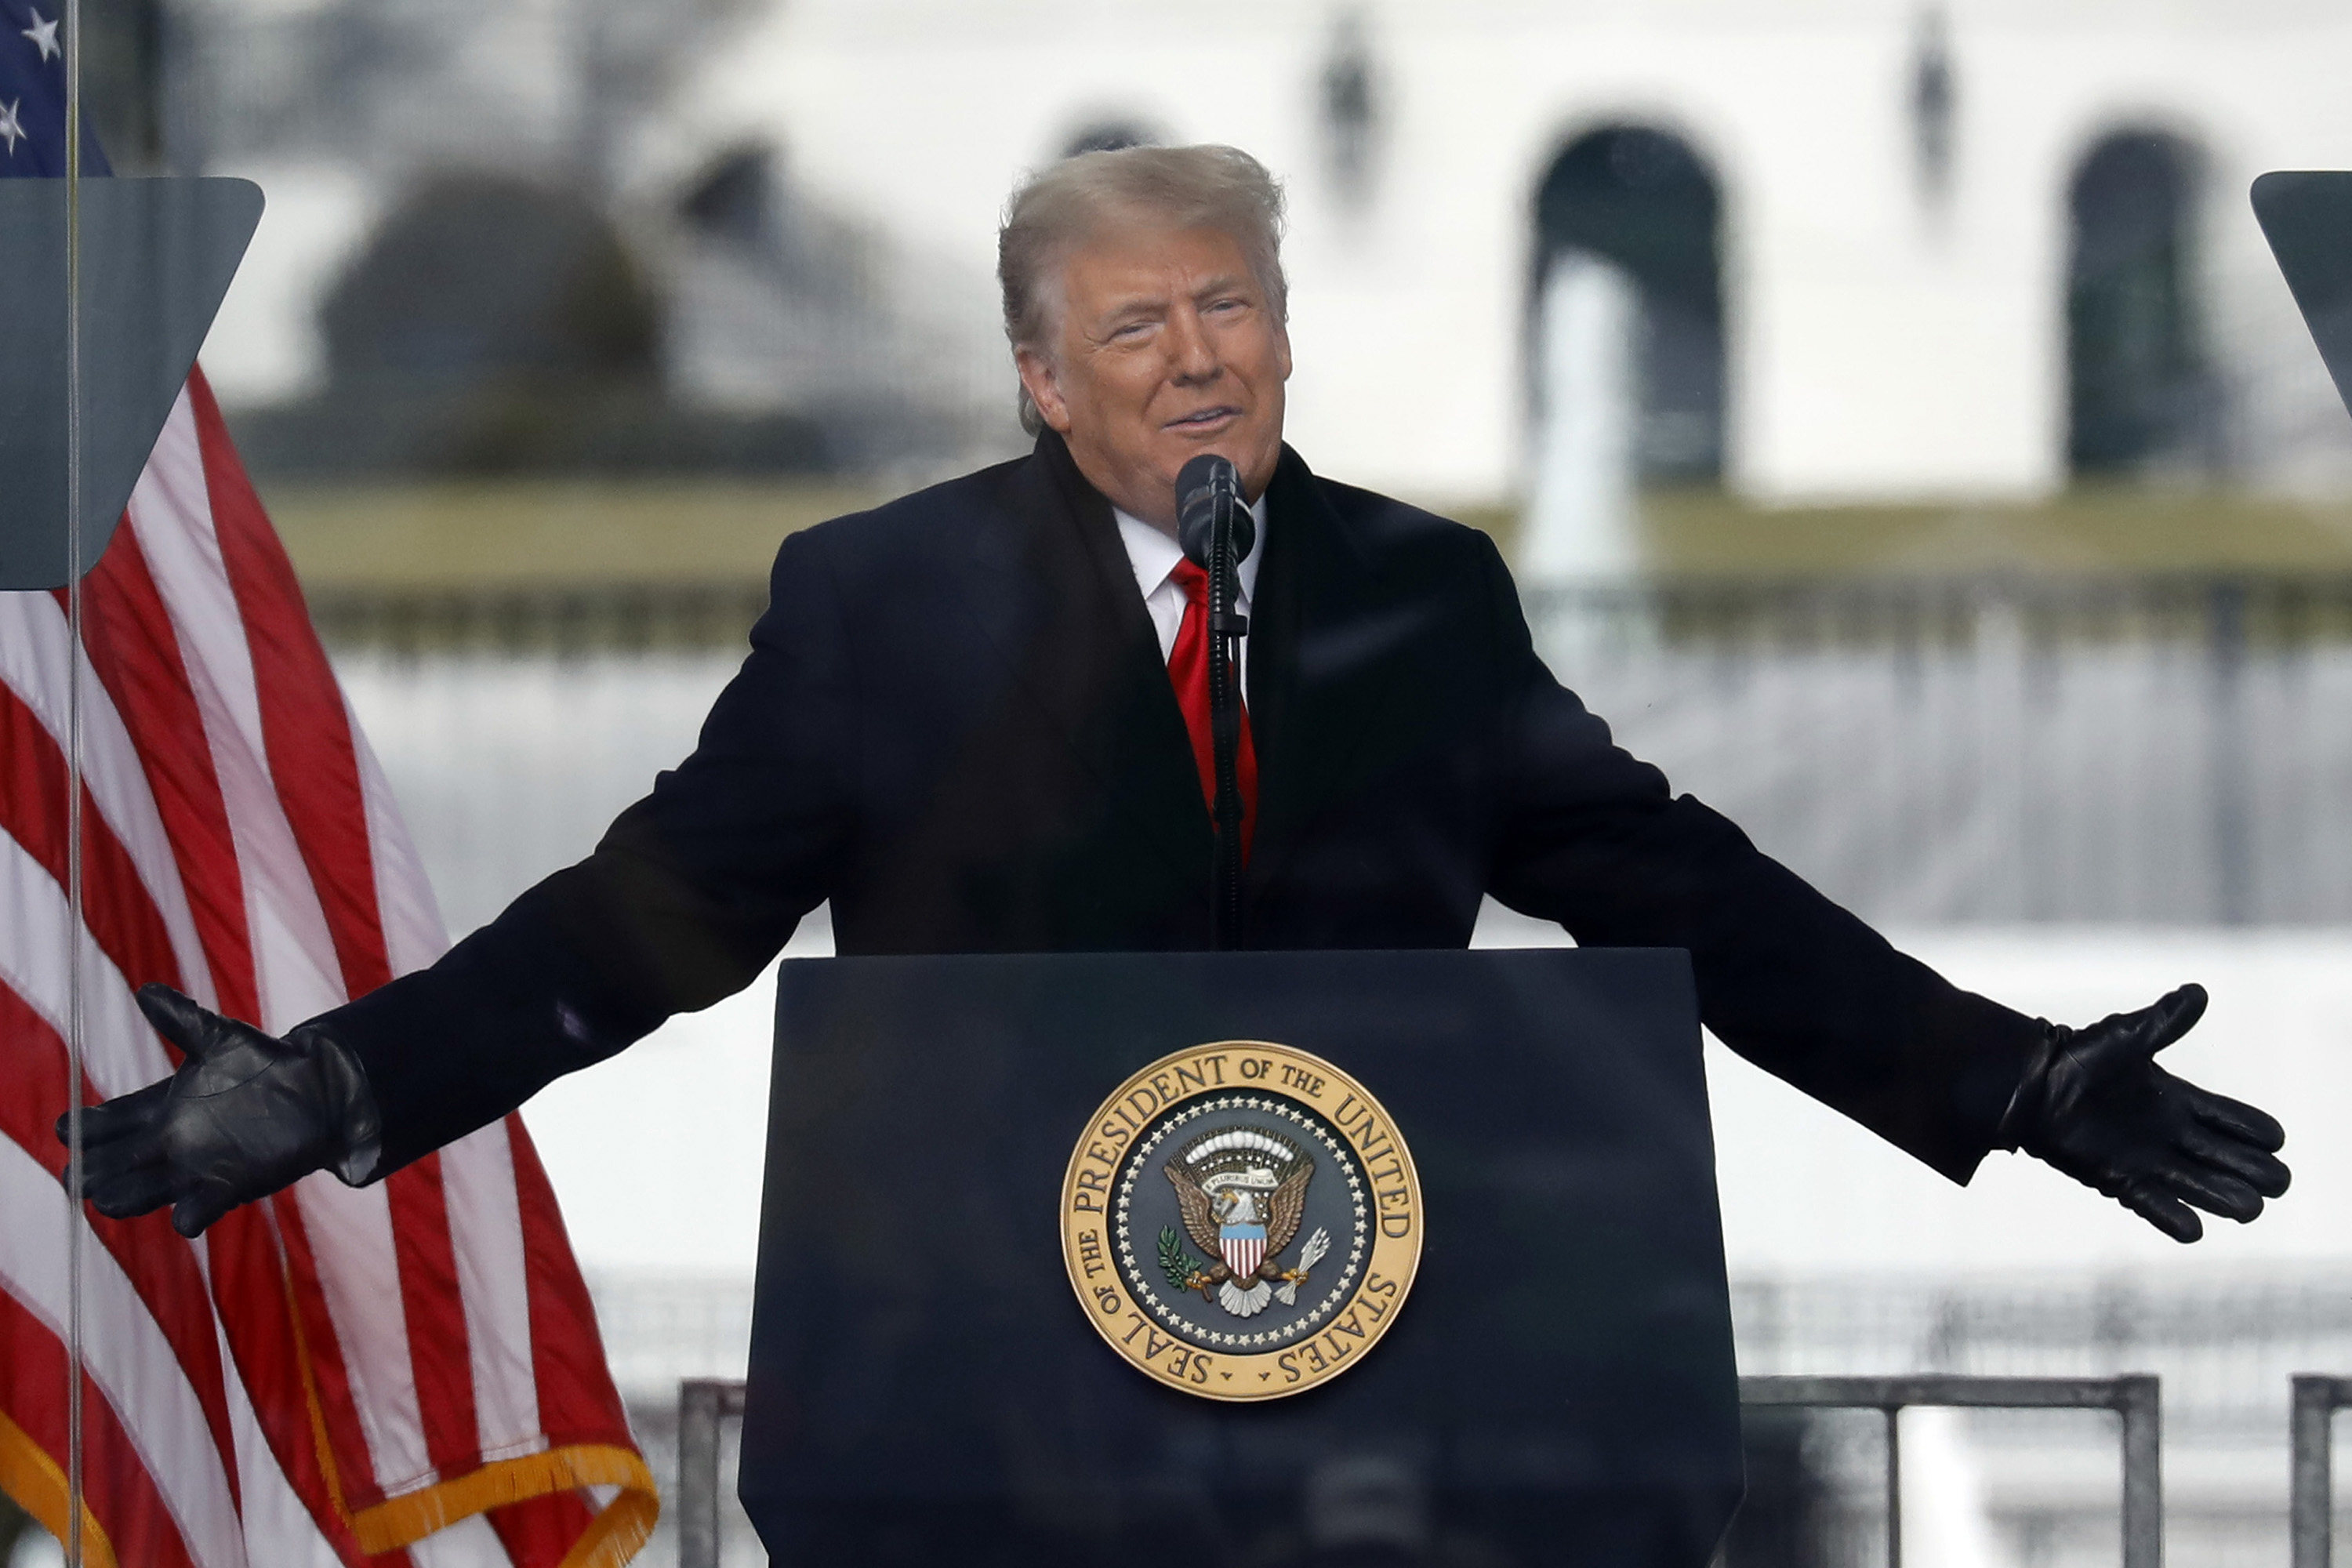 Former US President Donald Trump speaks at a rally on January 6, 2021, shortly before his supporters stormed the US Capitol. Photo: Abaca Press / TNS